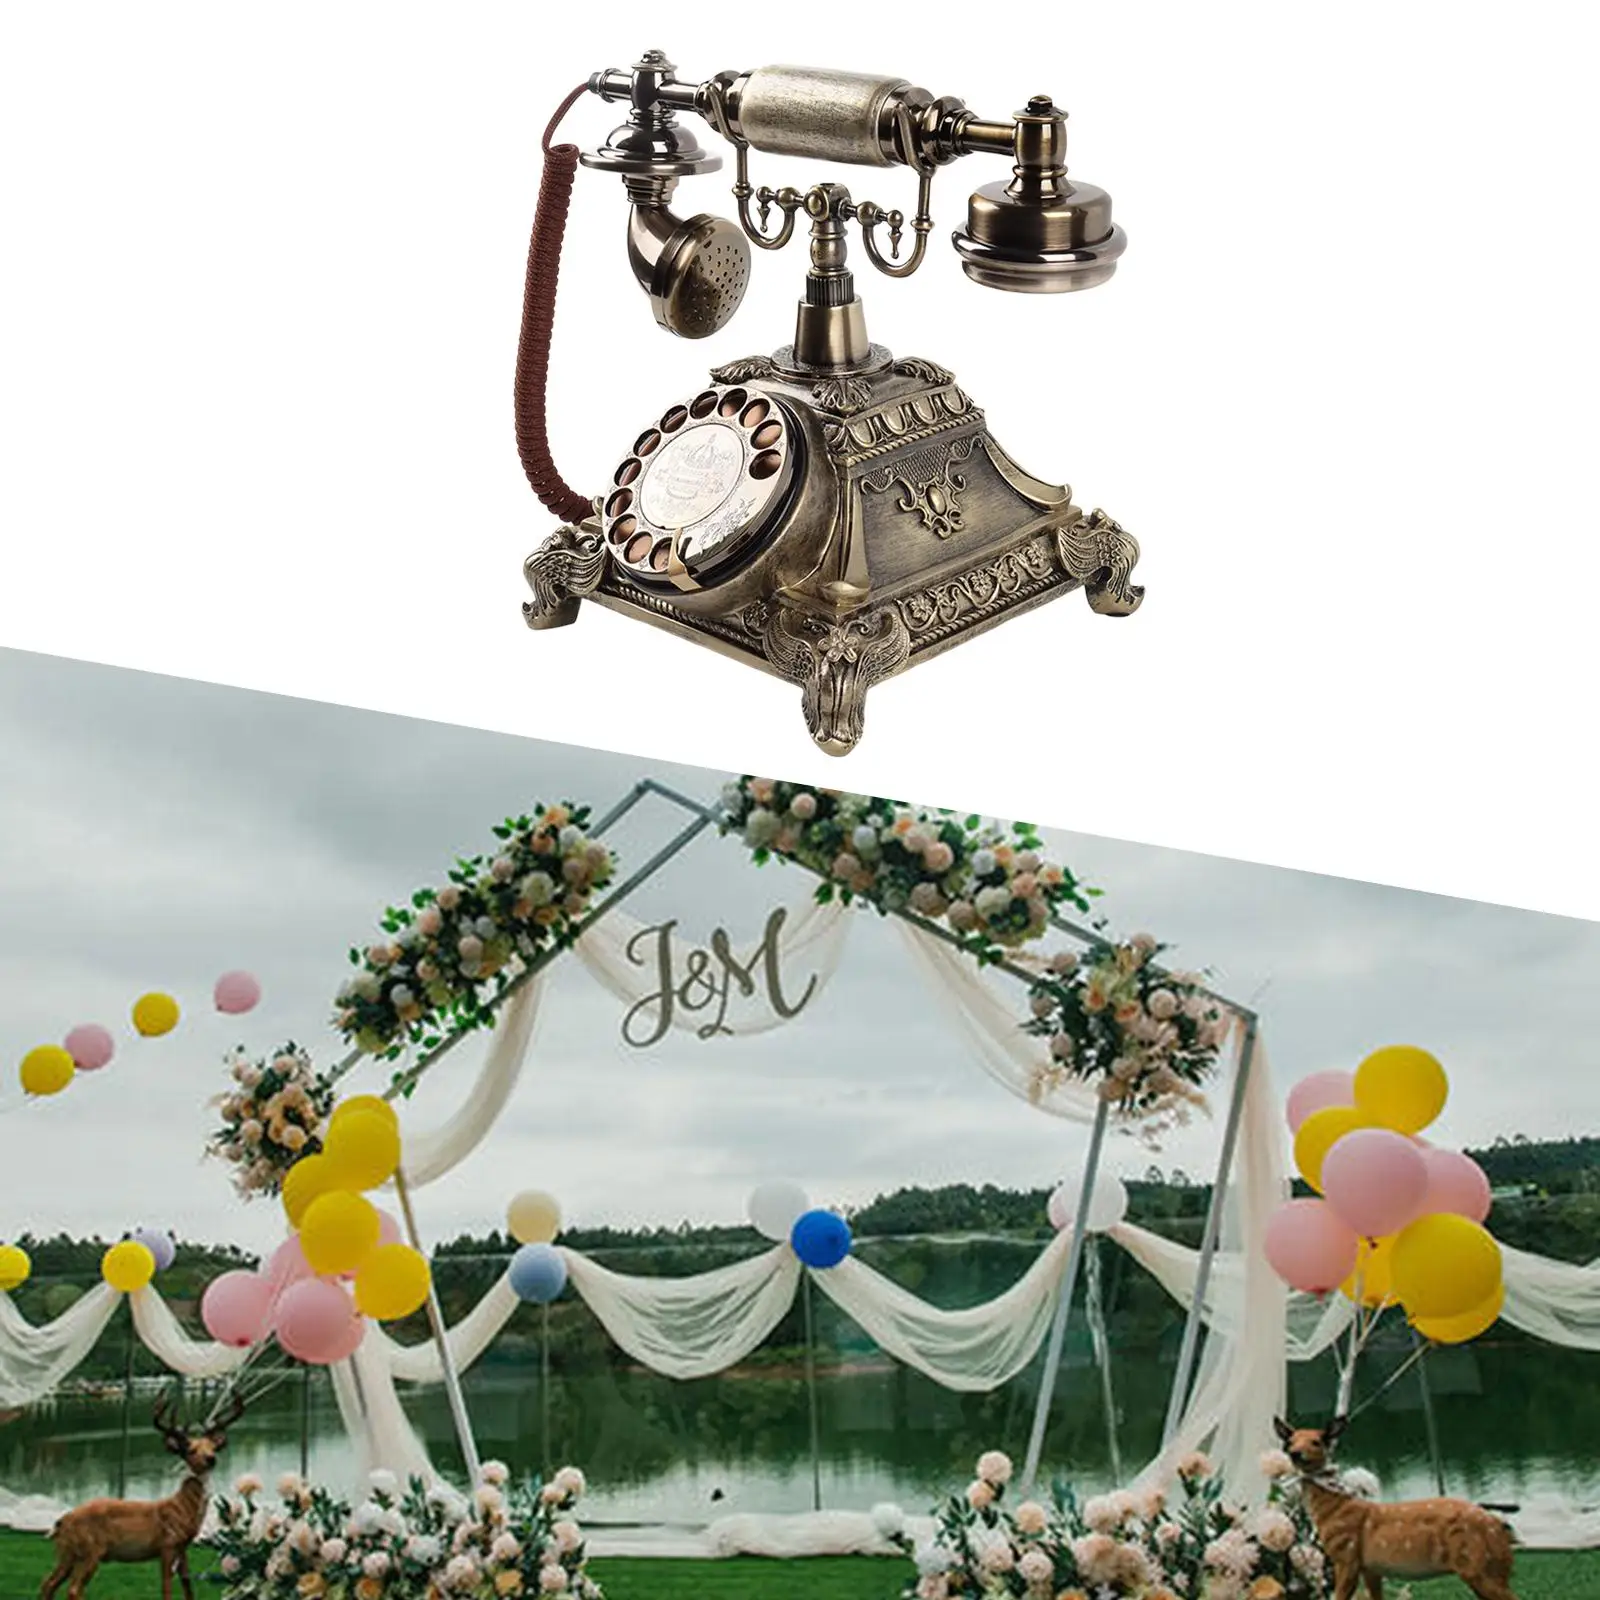 Guestbook Desktop Decor Captures Your Greetings Old Fashioned Decorative Wedding Phone for Special Event Birthday Wedding